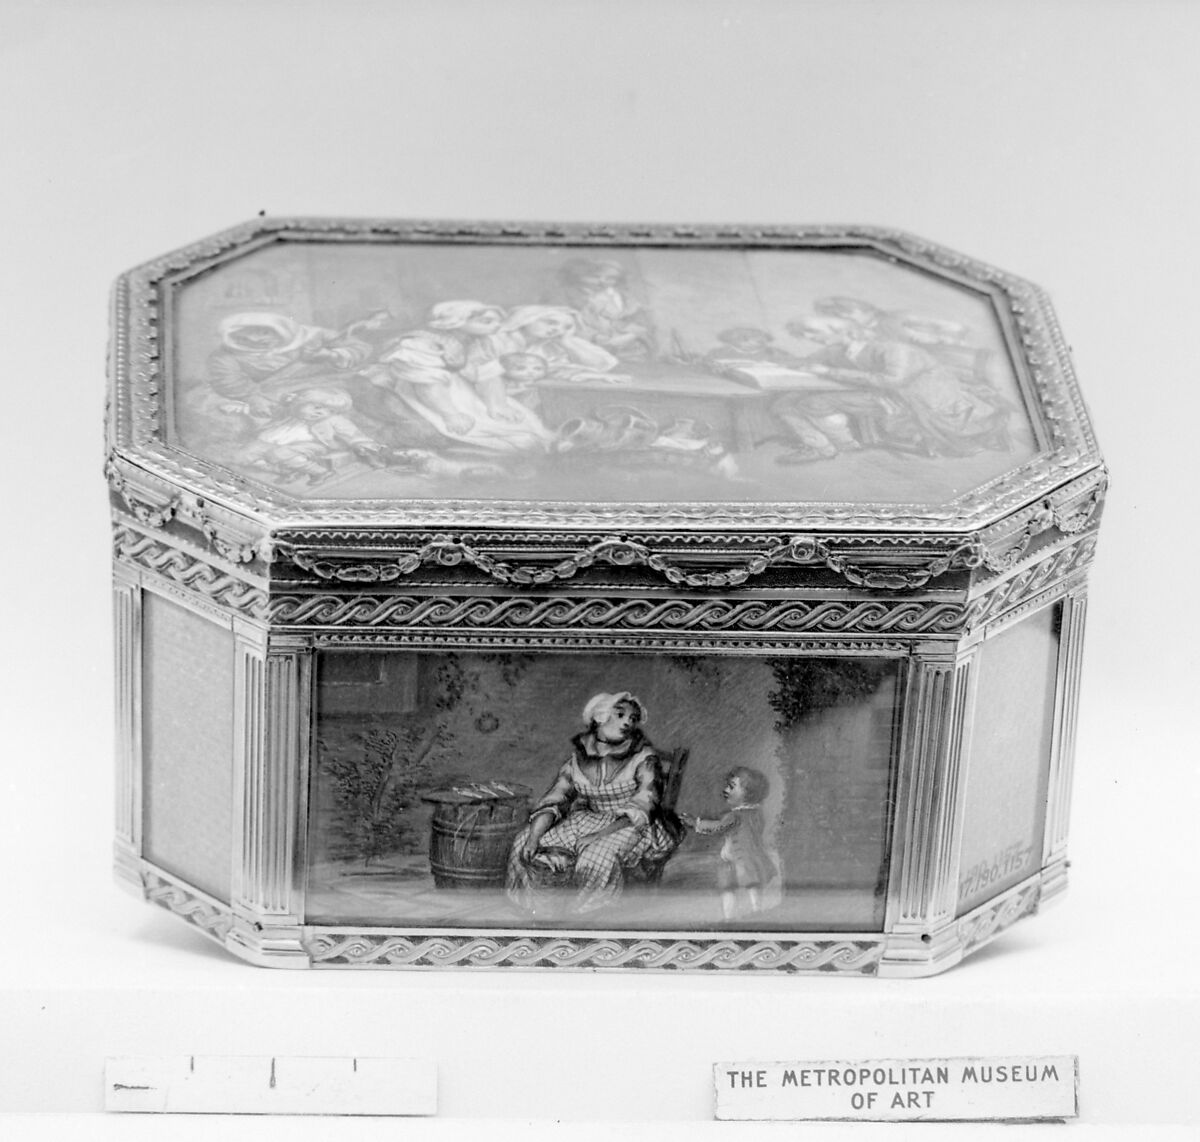 Snuffbox with household scenes, Jean-Joseph Barrière (French, apprenticed 1750, master 1763, active 1793), Gold, French, Paris 